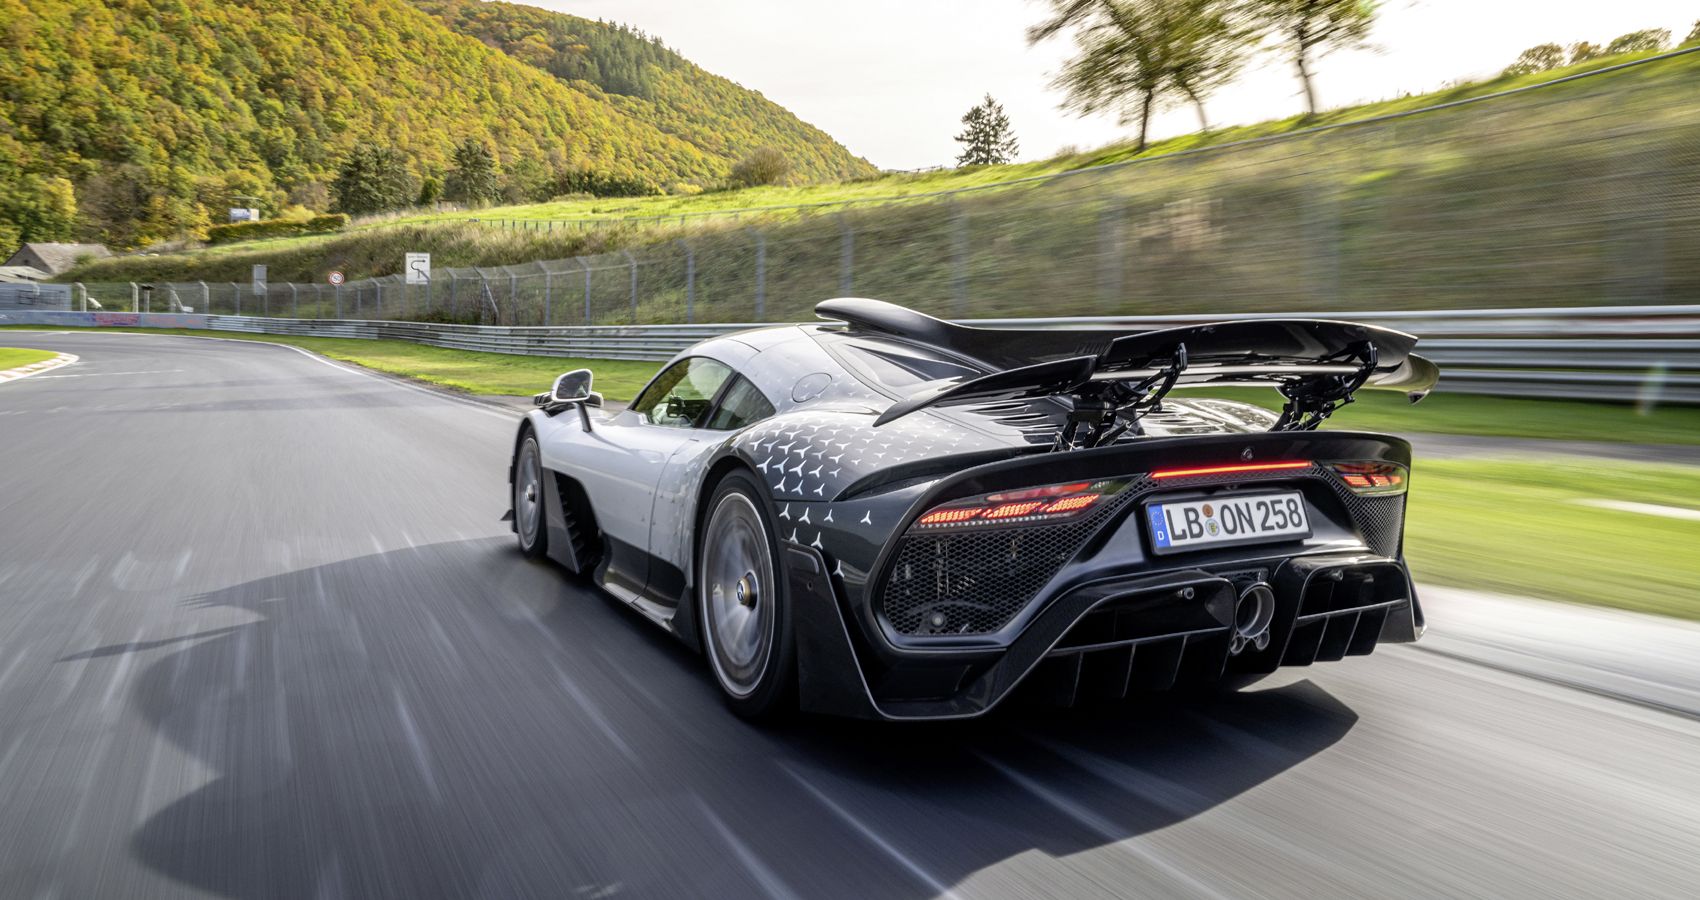 Mercedes-AMG ONE becomes fastest production car ever on the Nürburgring Nordschleife